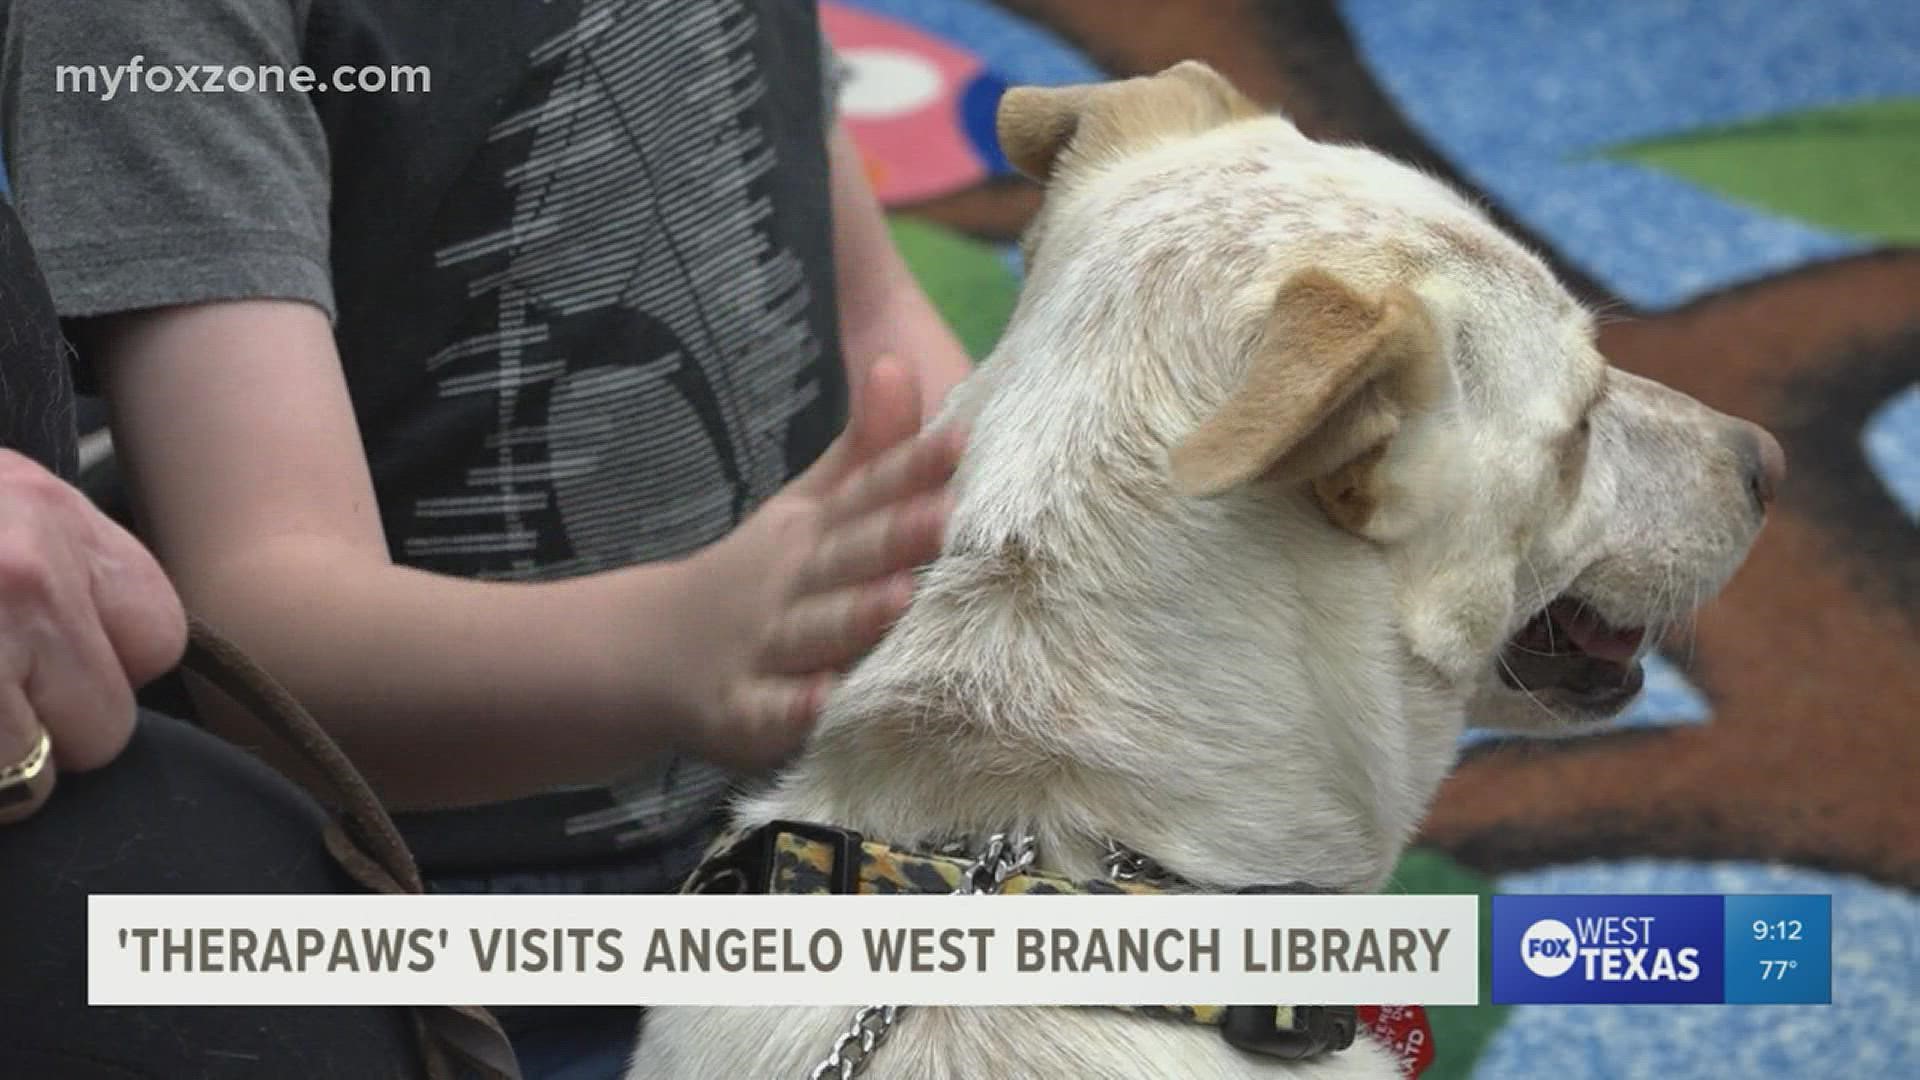 Every Wednesday, the Tom Green County Library - Angelo West Branch brings in therapy dogs for the community to enjoy.